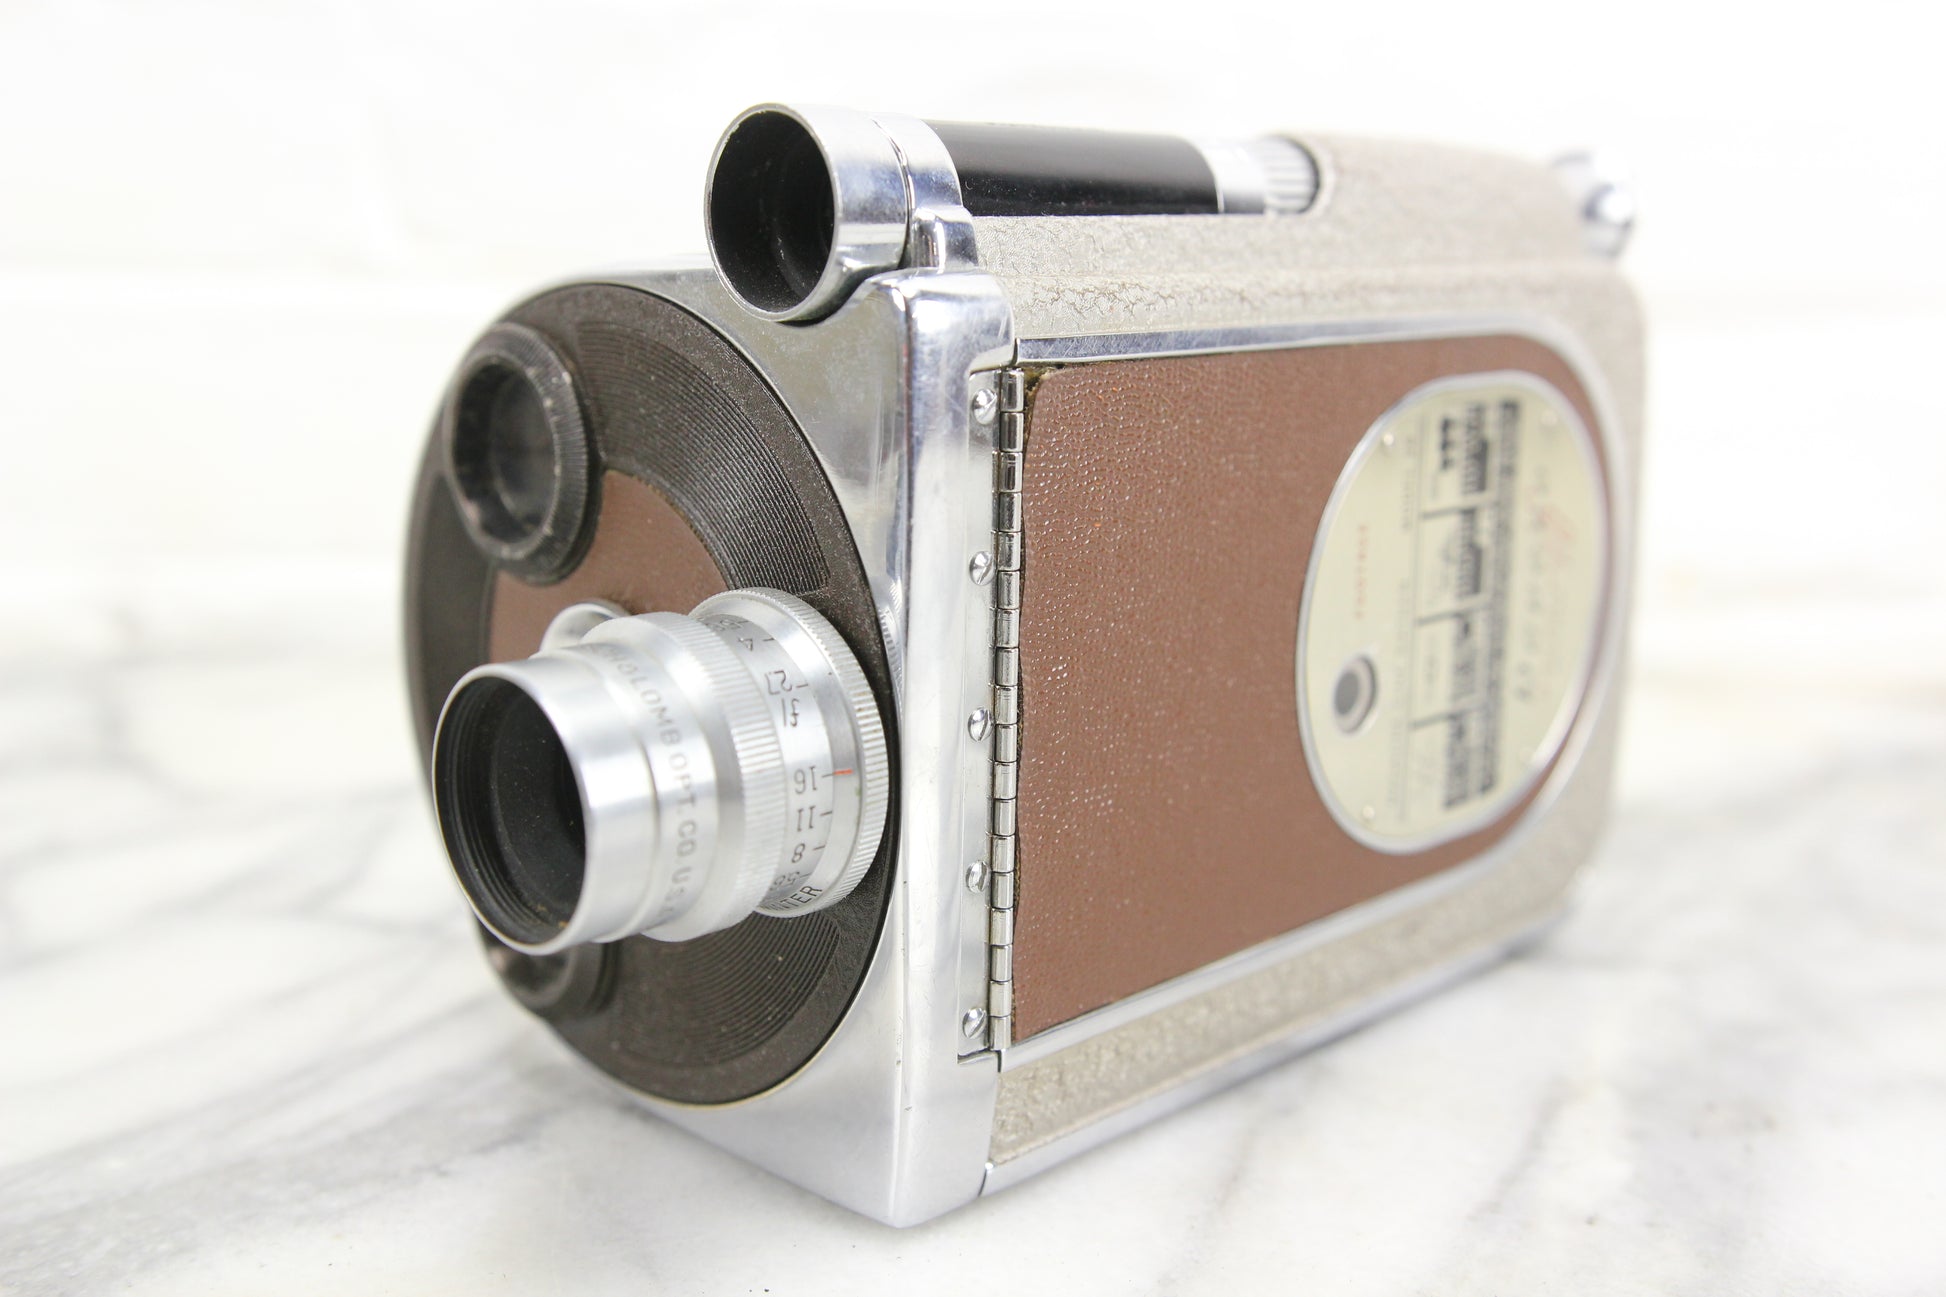 Reel Neat, From the Revere Camera Company of Chicago, Illin…